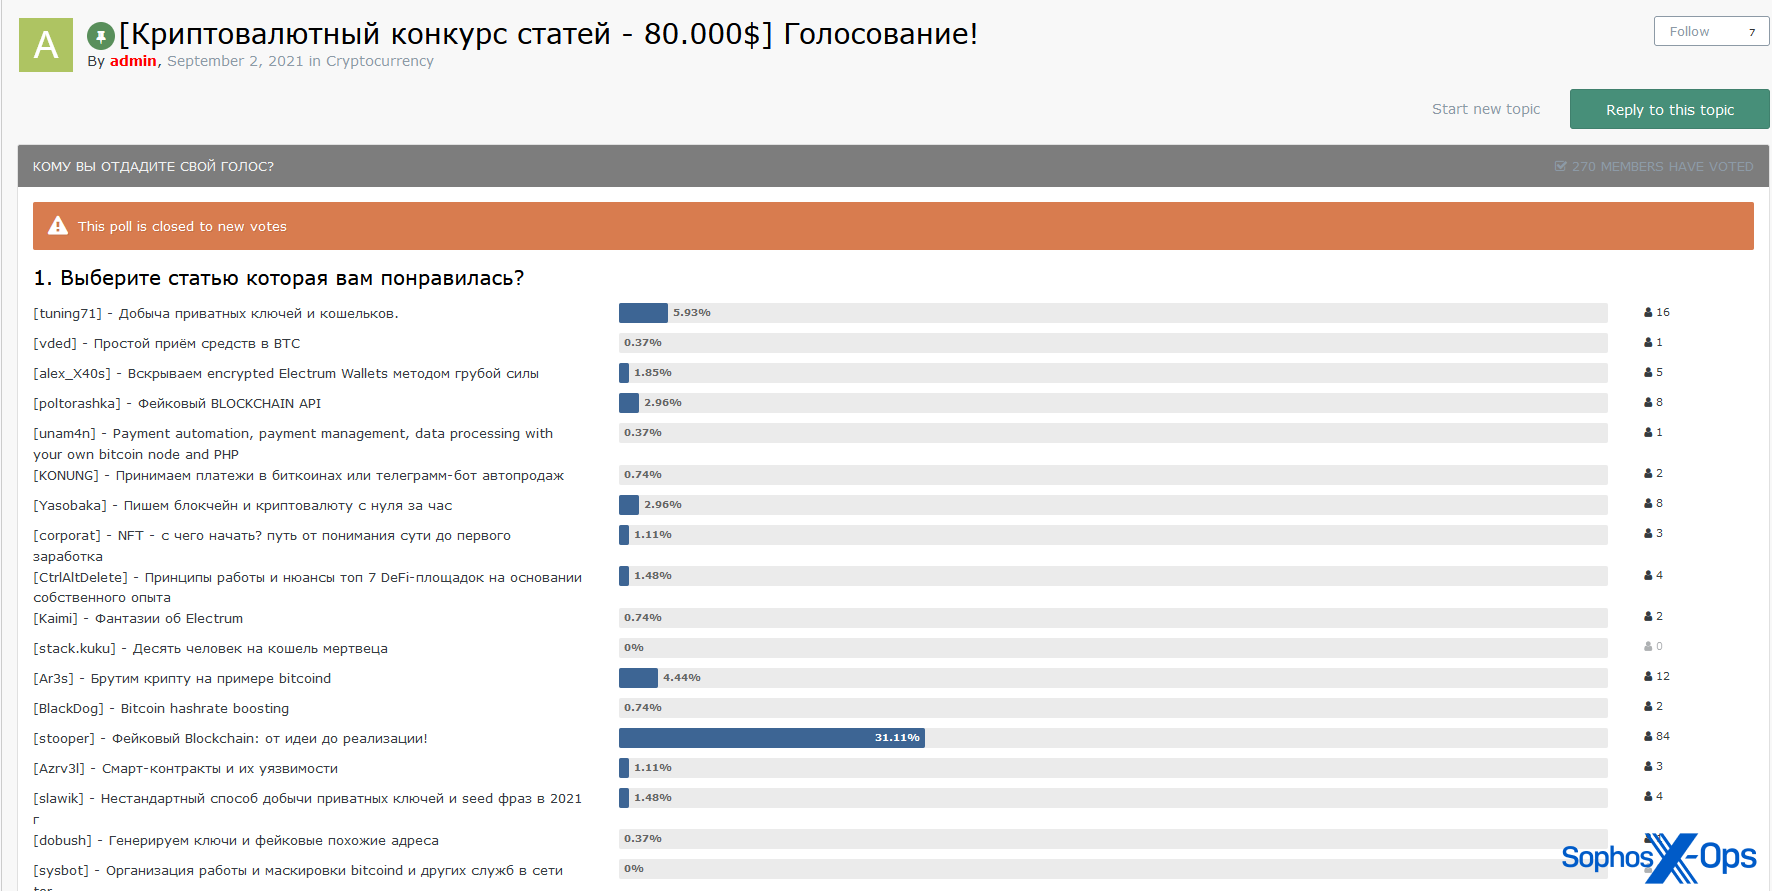 A screenshot from a poll on a criminal forum, with text in Russian